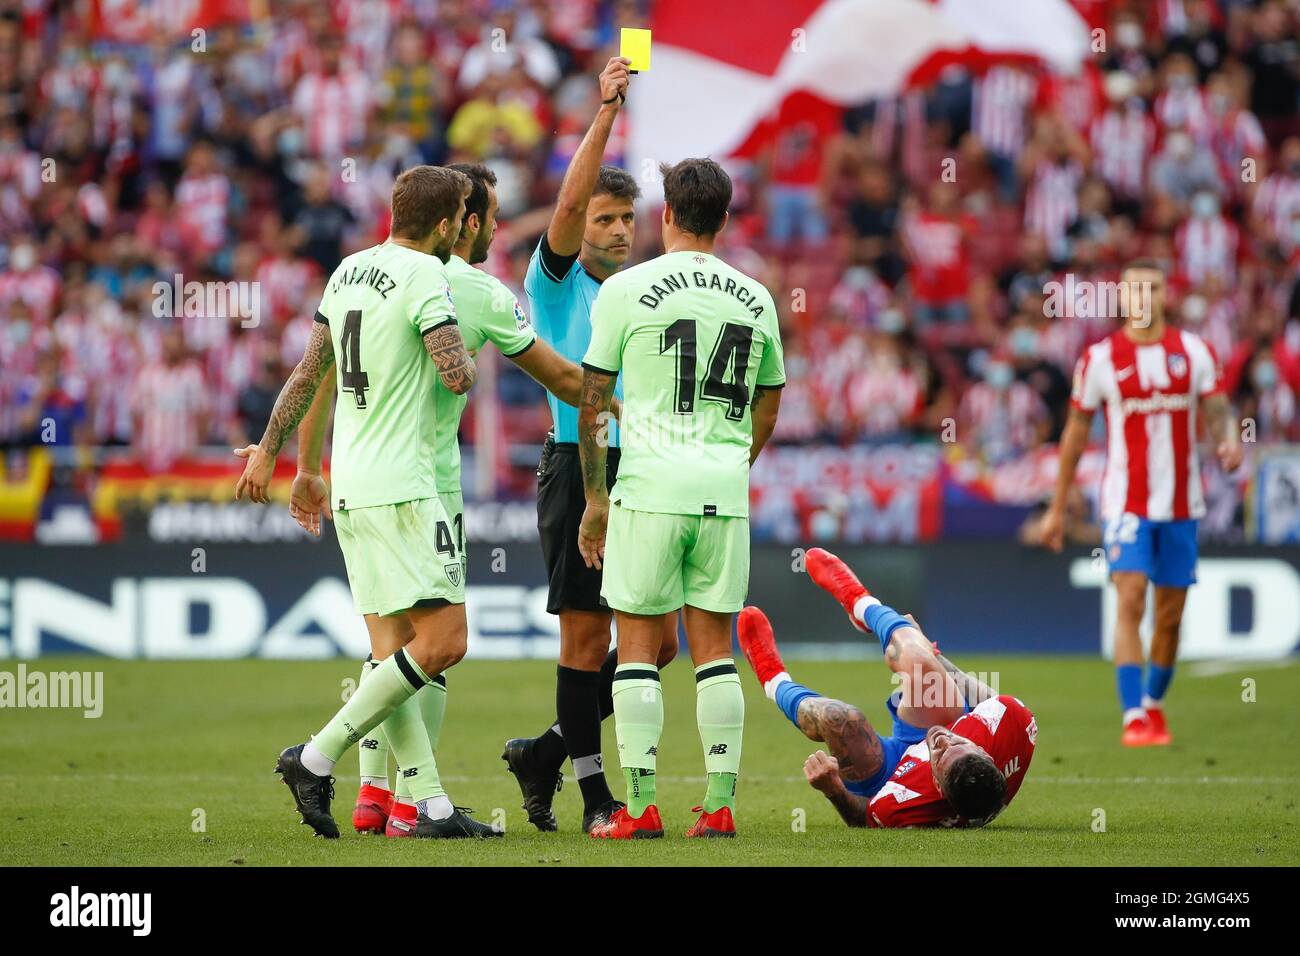 Referee sowhs Yellow card to Dani Garcia of Athletic Club during the La Liga match between Atletico de Madrid and Athletic Club Bilbao at Wanda Metropolitano Stadium in Madrid, Spain. Stock Photo